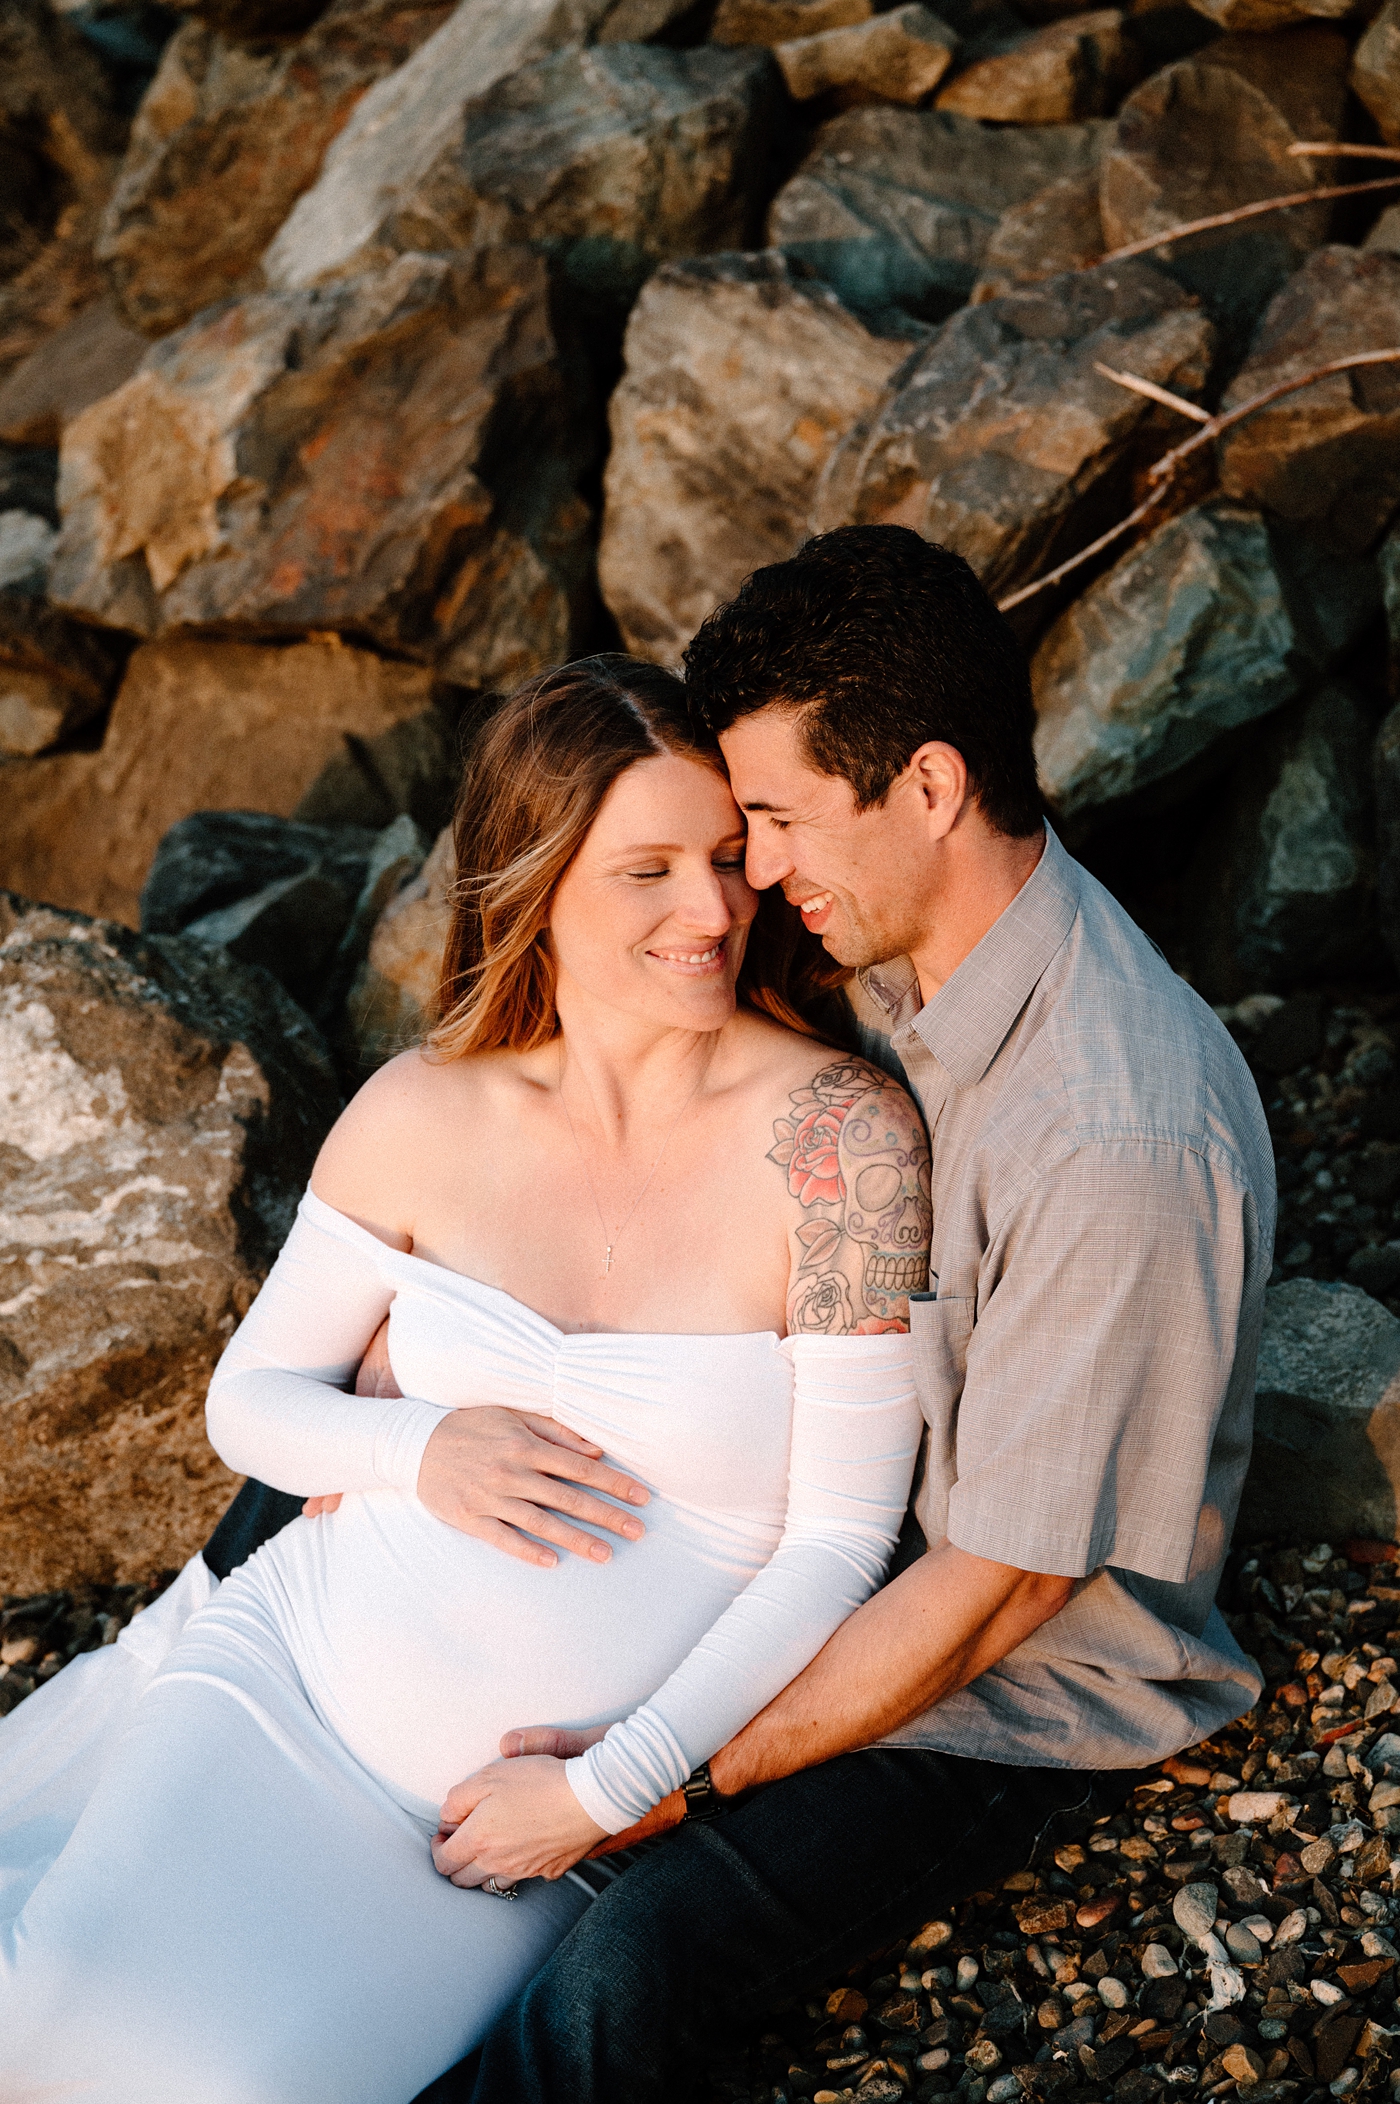 Parents to be beaming with pride as they lovingly embrace. Image by PNW maternity photographer Meg Newton.